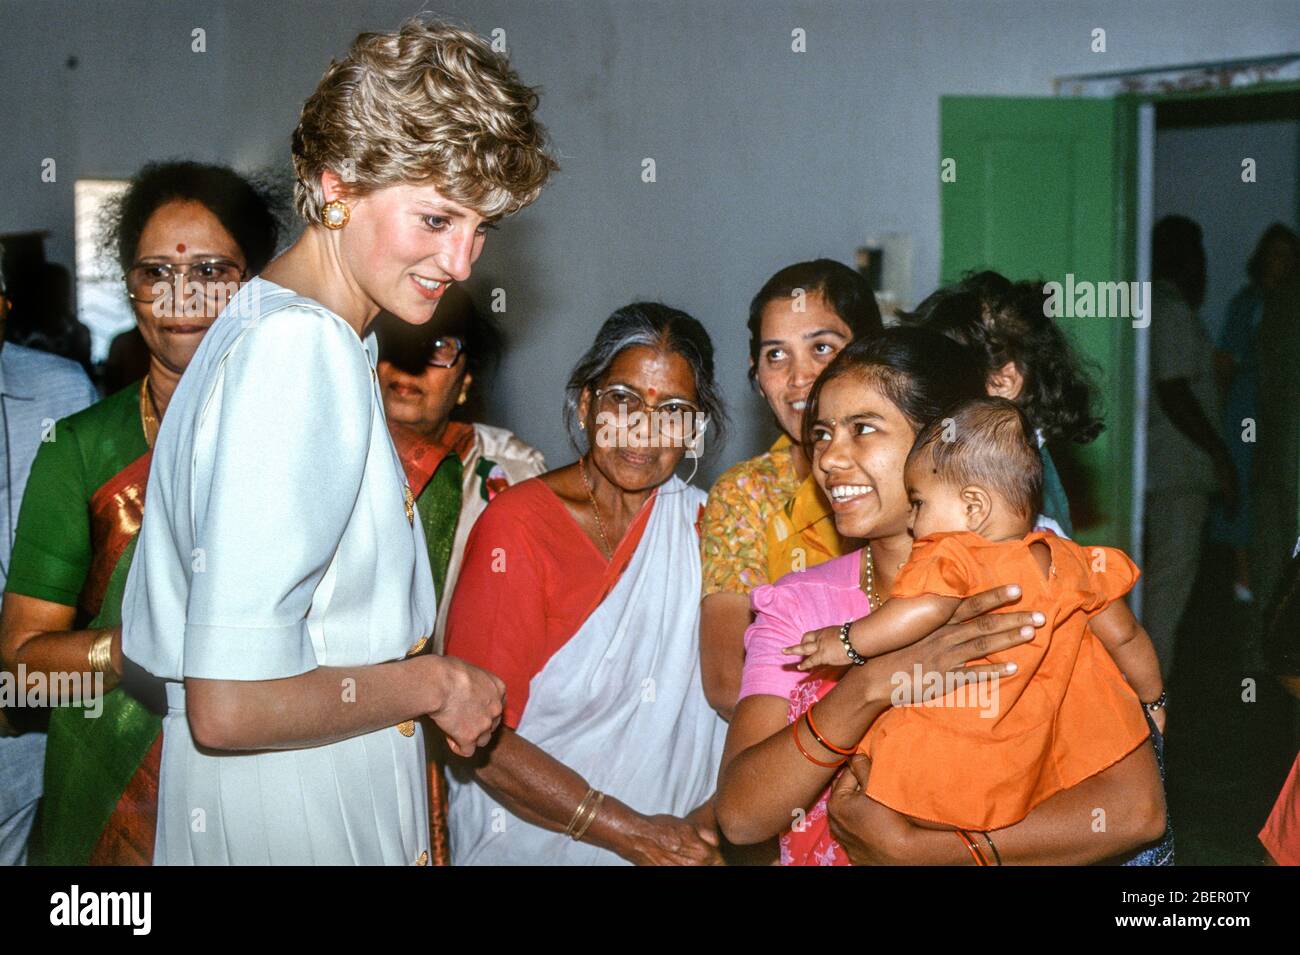 HRH Diana, Princess of Wales visits families in Calcutta during her Royal tour of India February 1992. Stock Photo